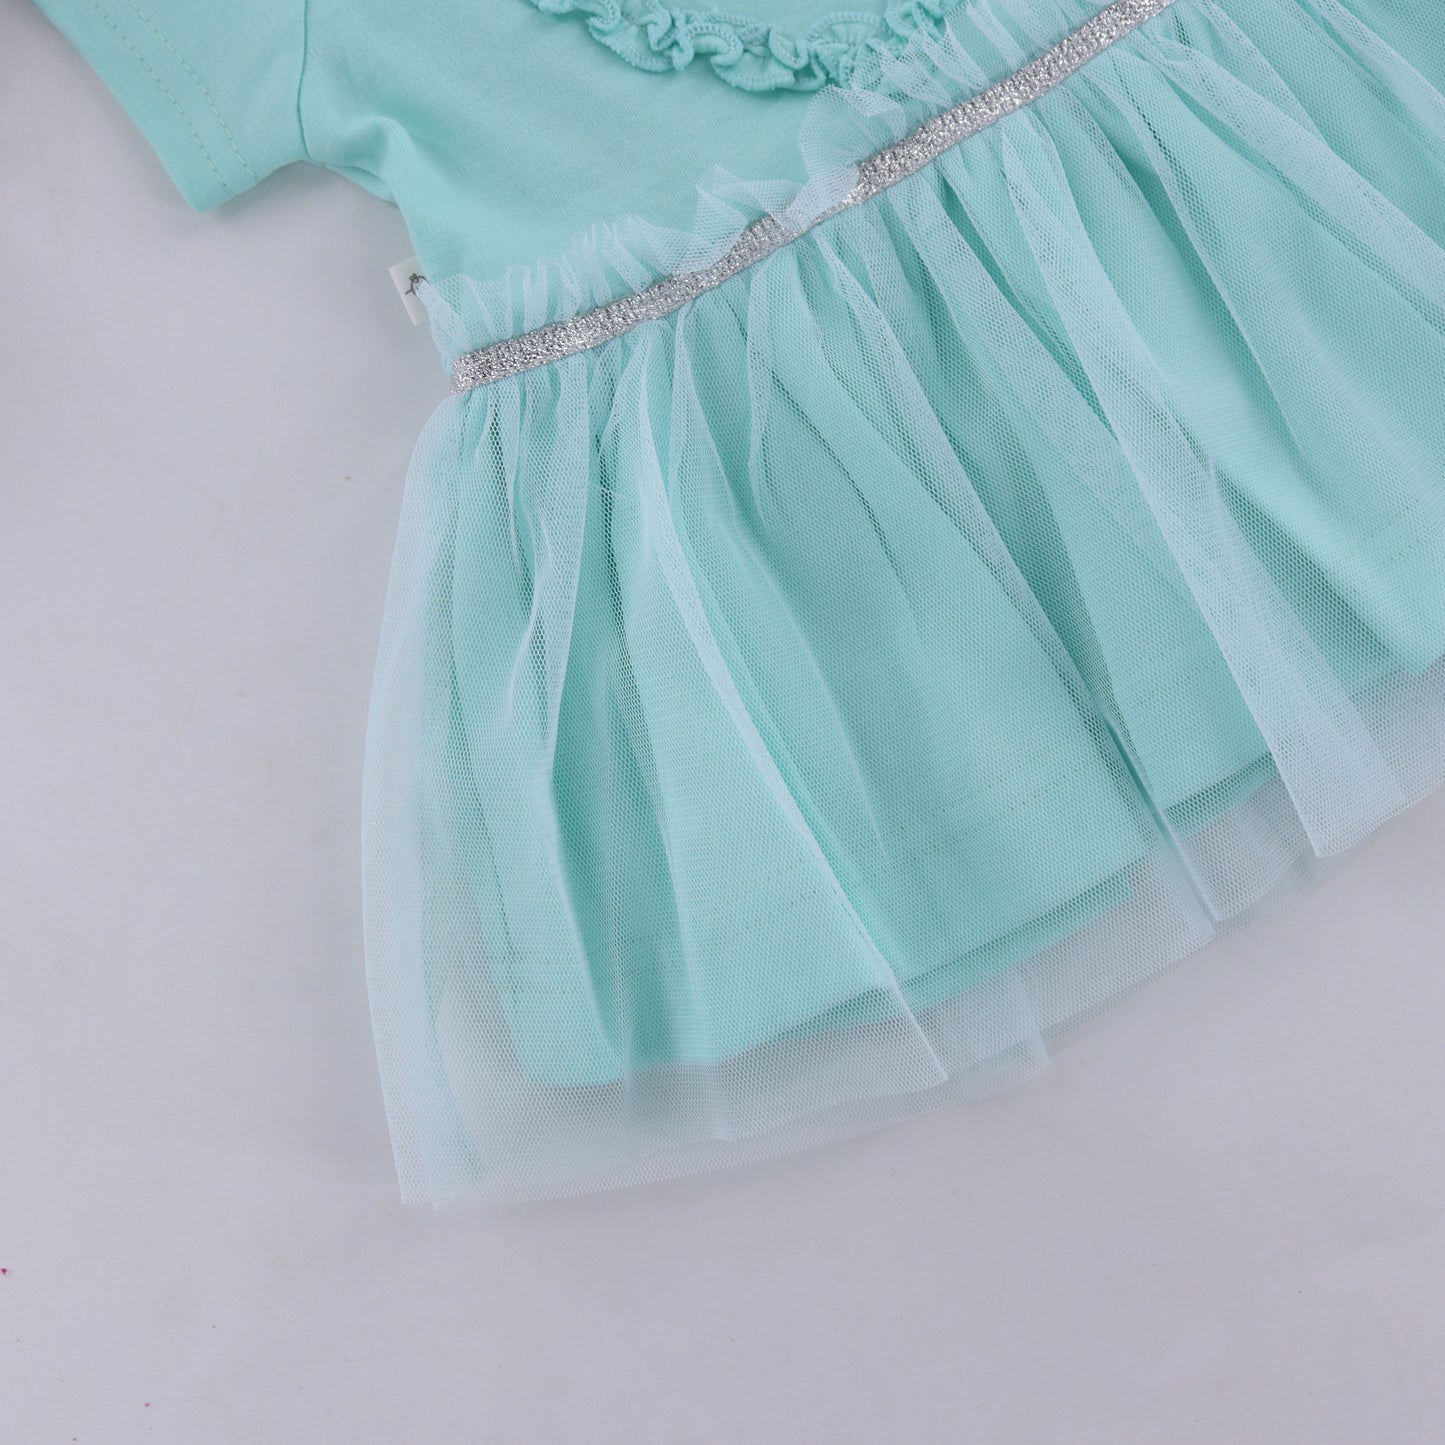 Littileista Kids Half Sleeves Frock with Floral Applique & Lace Detailing